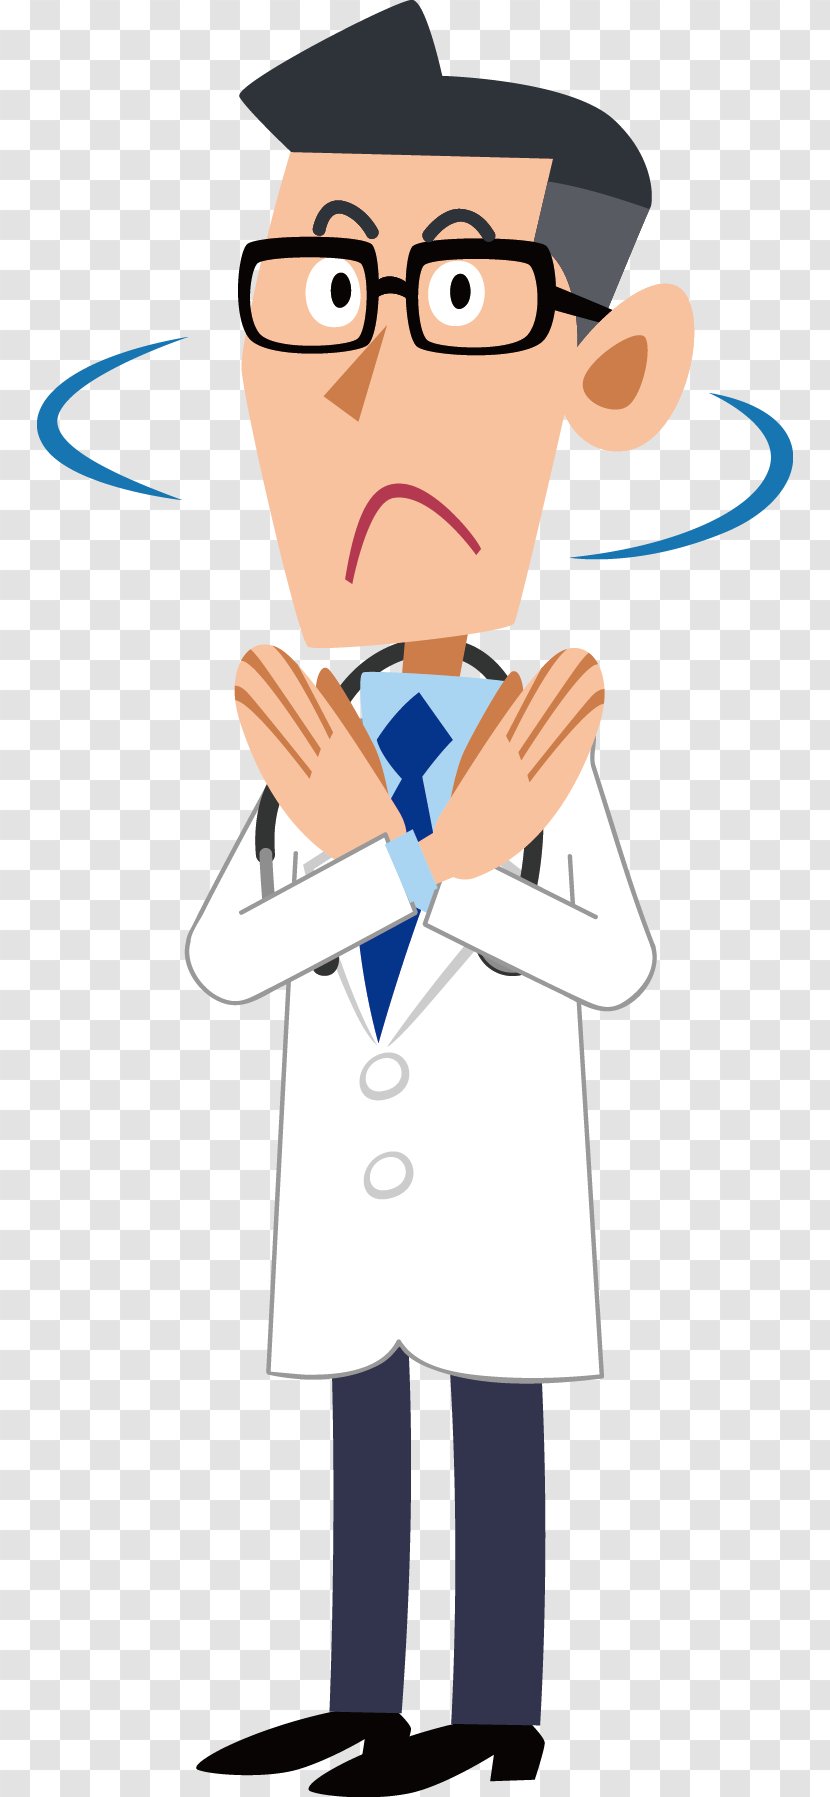 Physician Cartoon Dentist - Search Engine - Doctor Elements Transparent PNG